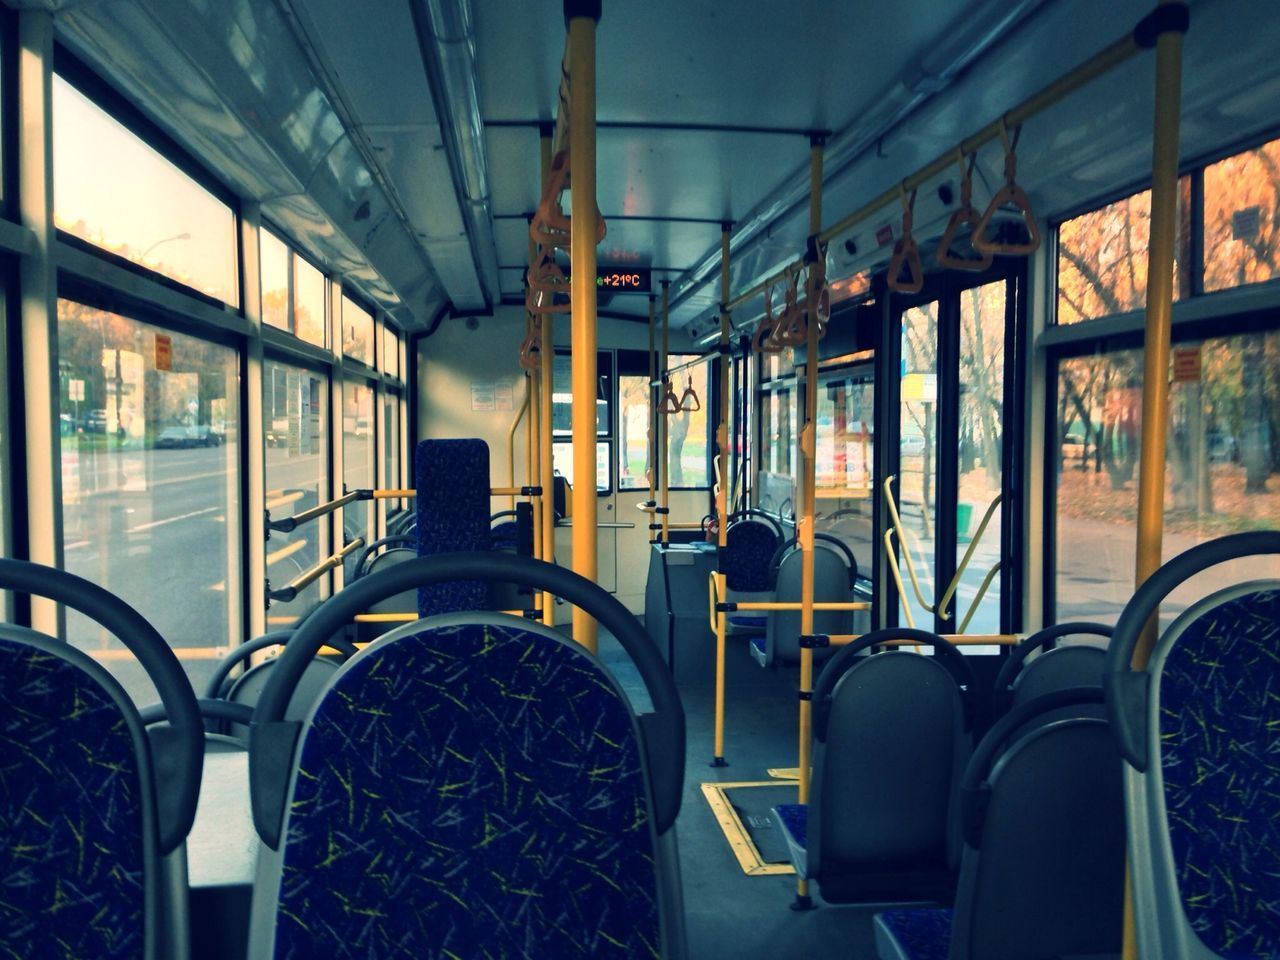 indoors, window, transportation, interior, vehicle interior, architecture, mode of transport, absence, empty, built structure, glass - material, vehicle seat, chair, seat, ceiling, no people, transparent, public transportation, sunlight, travel